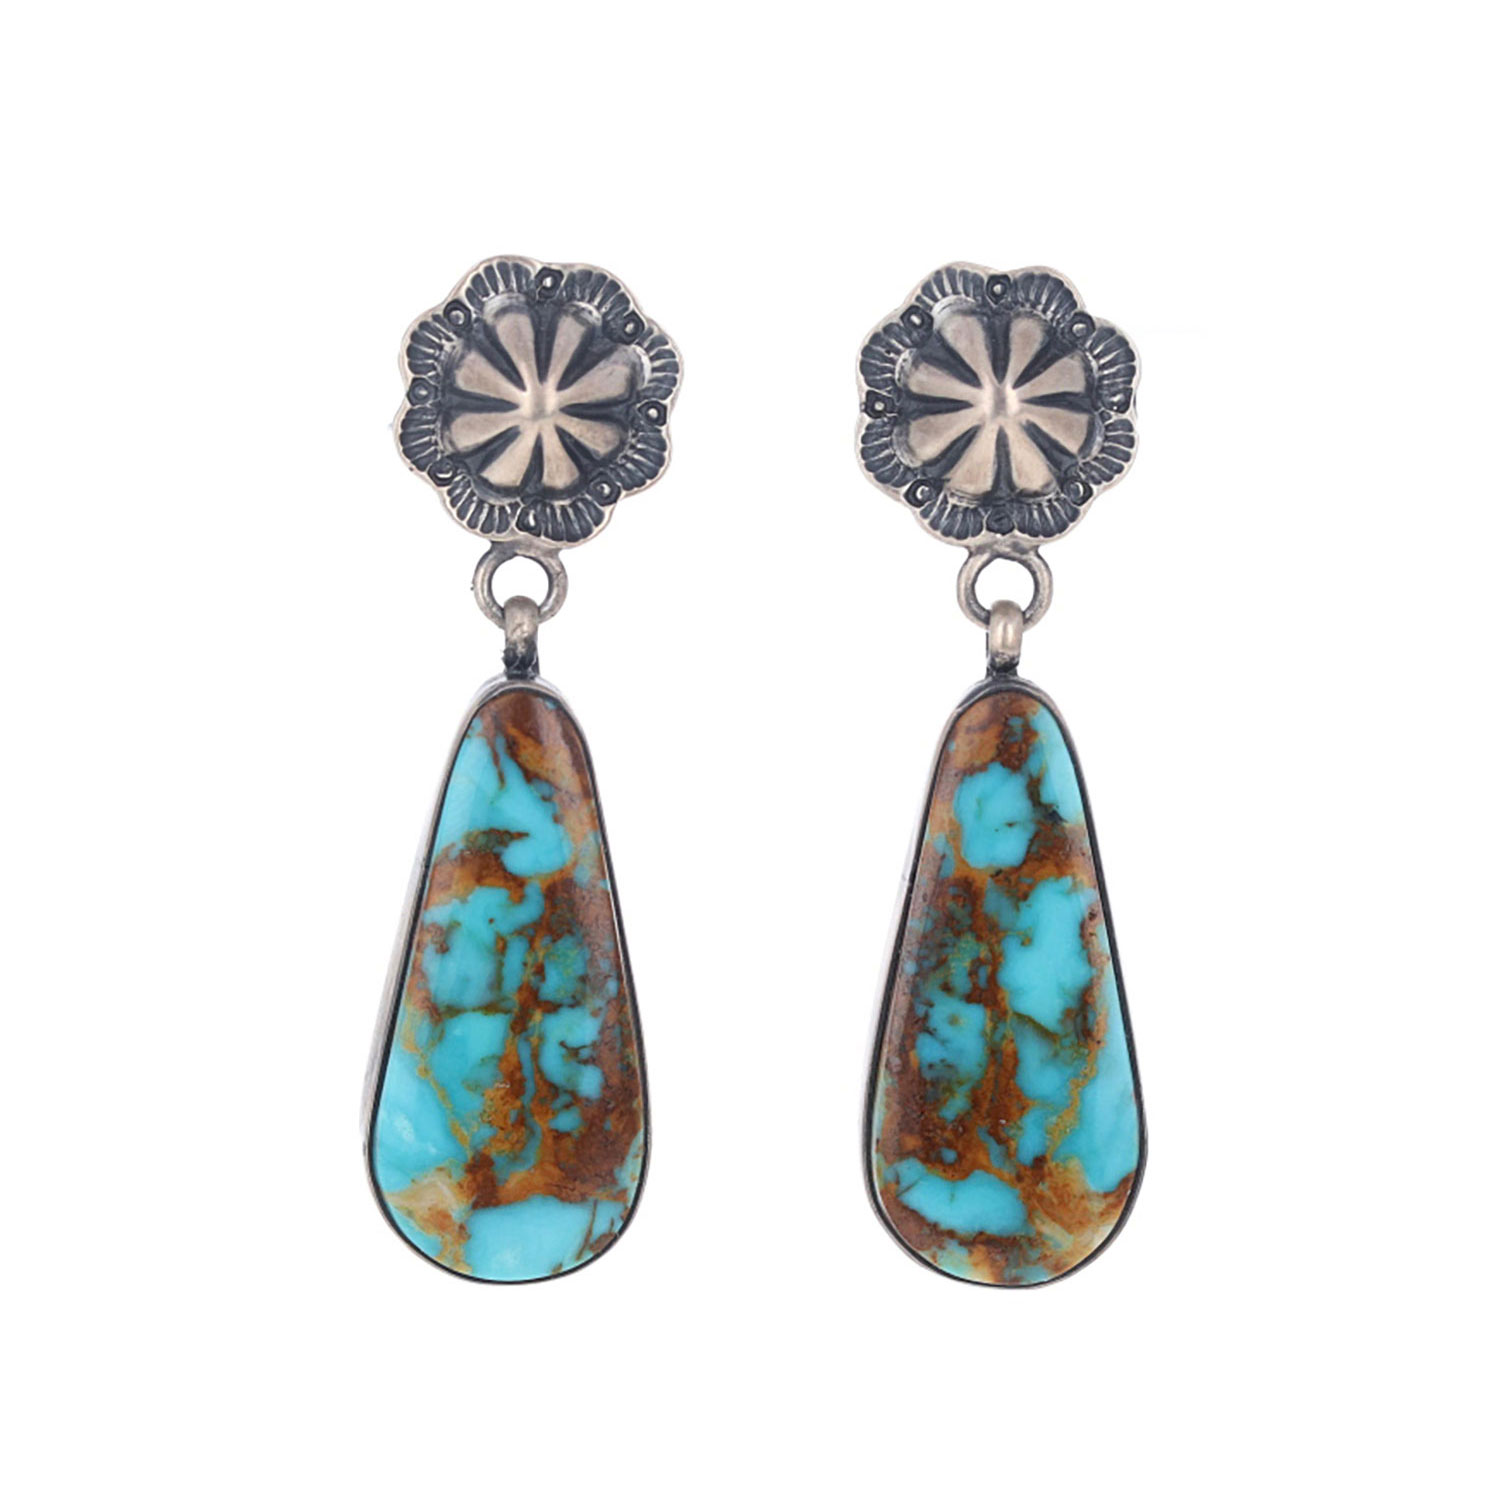 Turquoise Post Drop Earrings - Malouf on the Plaza